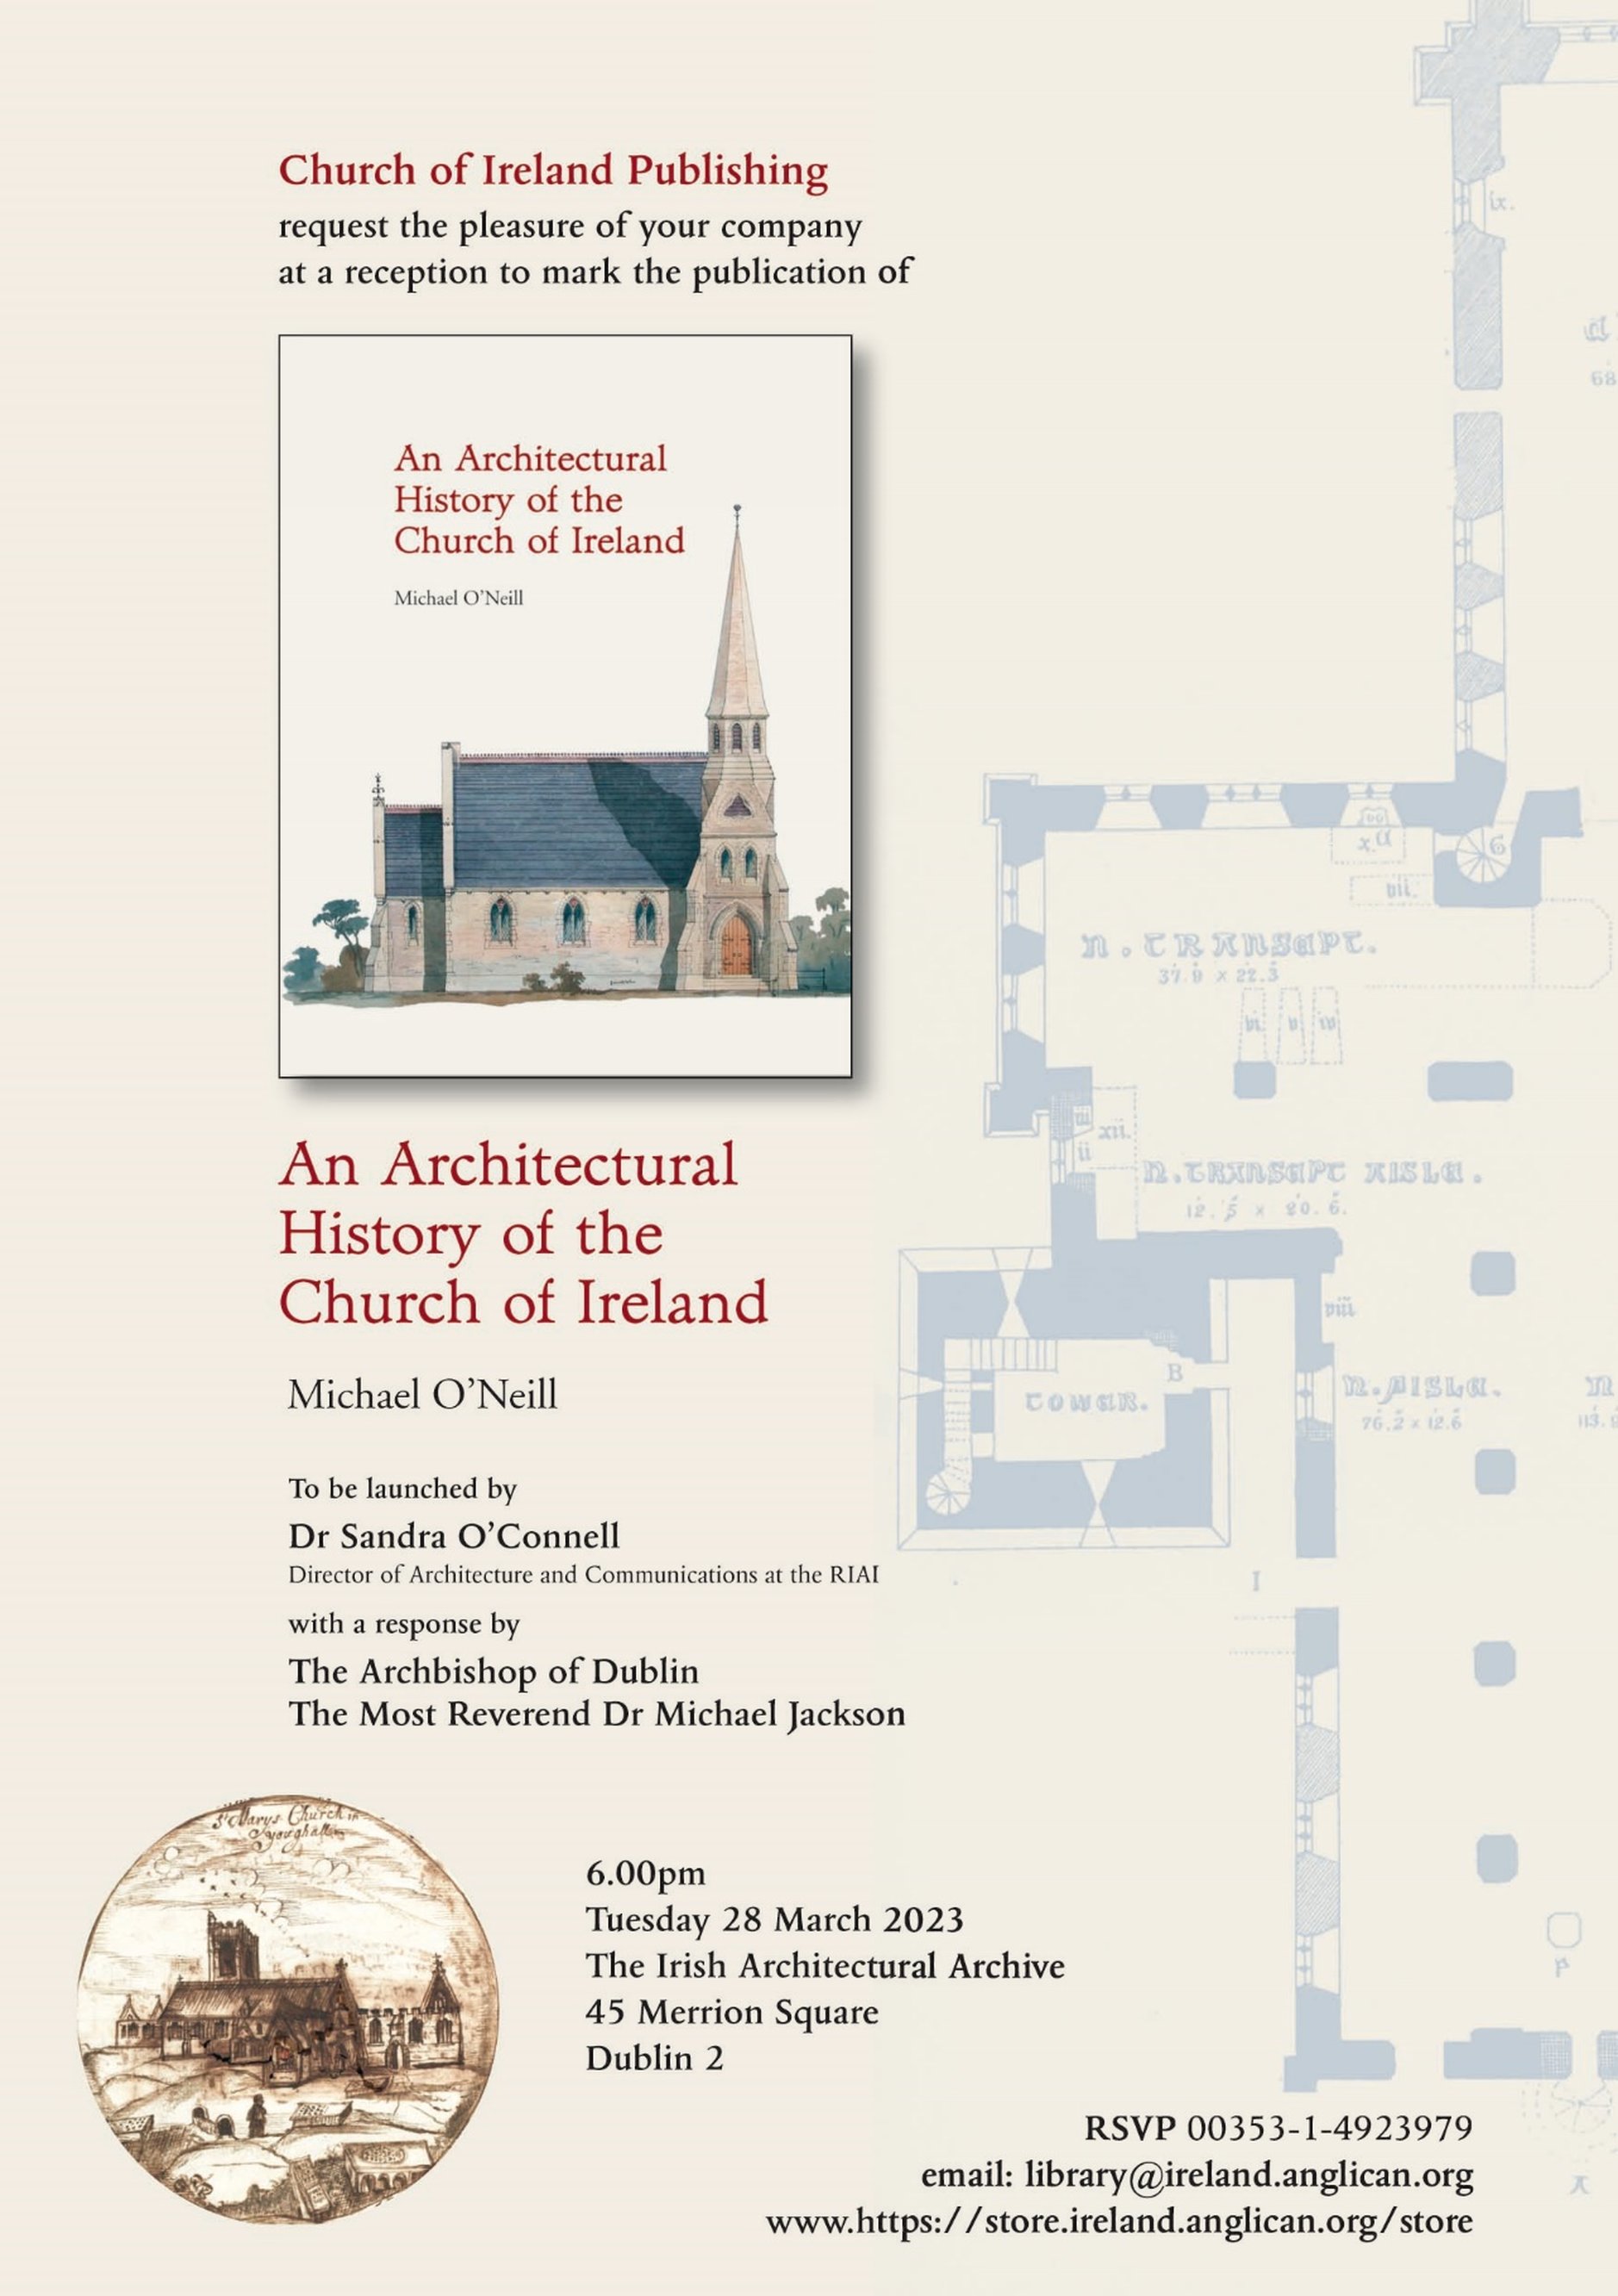 Launch of ‘An Architectural History of the Church of Ireland’